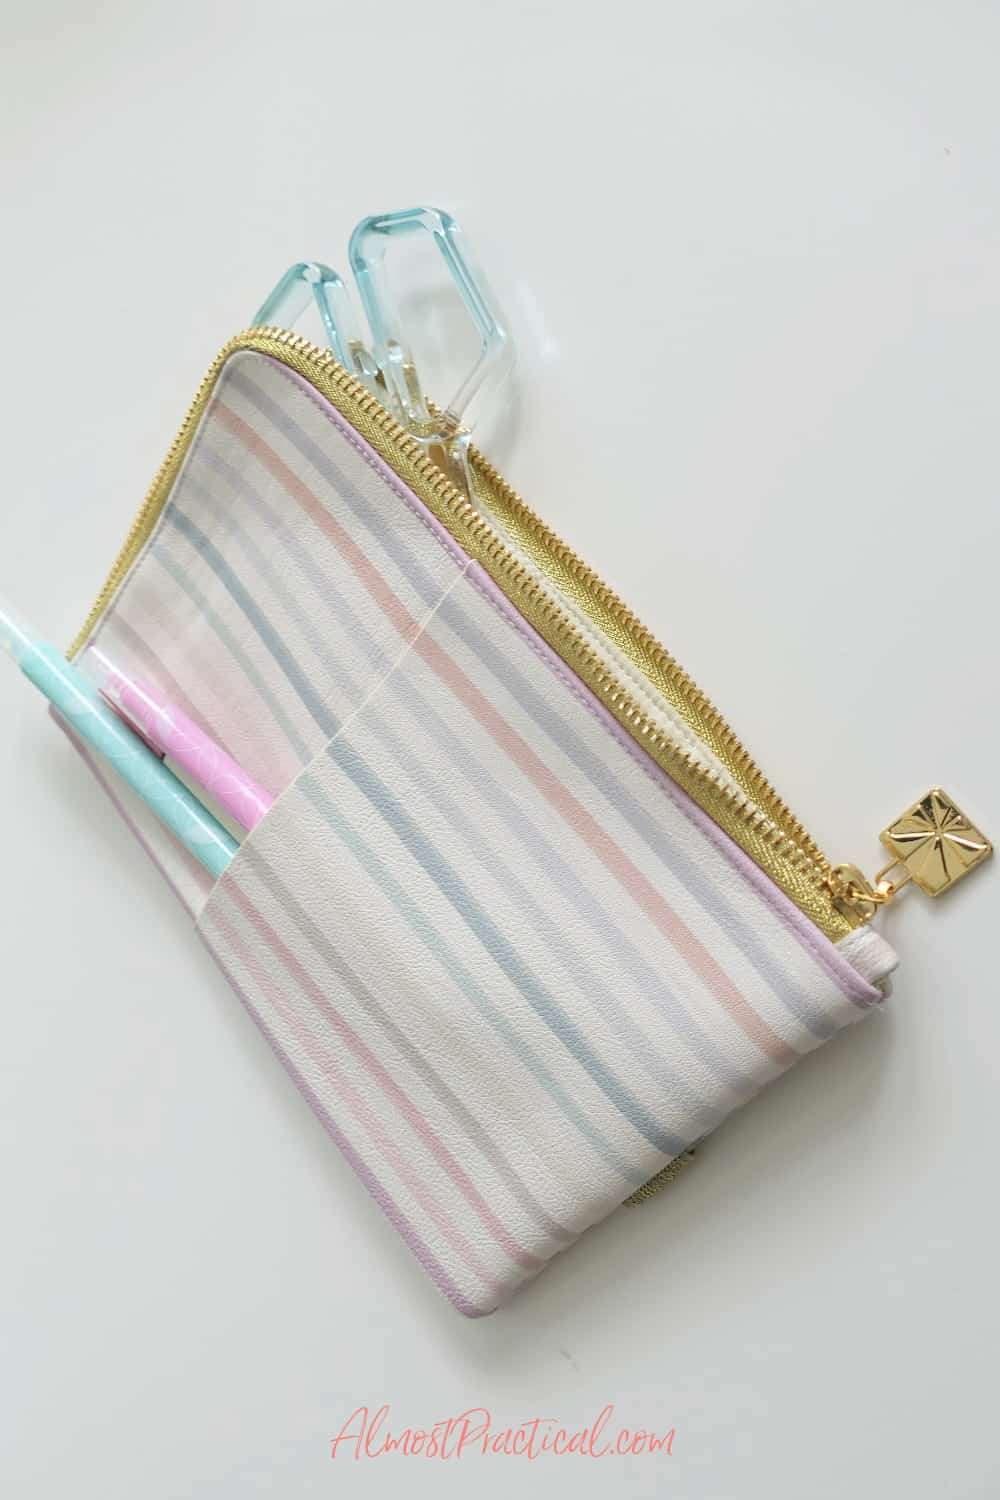 zipper pouch with scissors inside and markers in an outer pocket